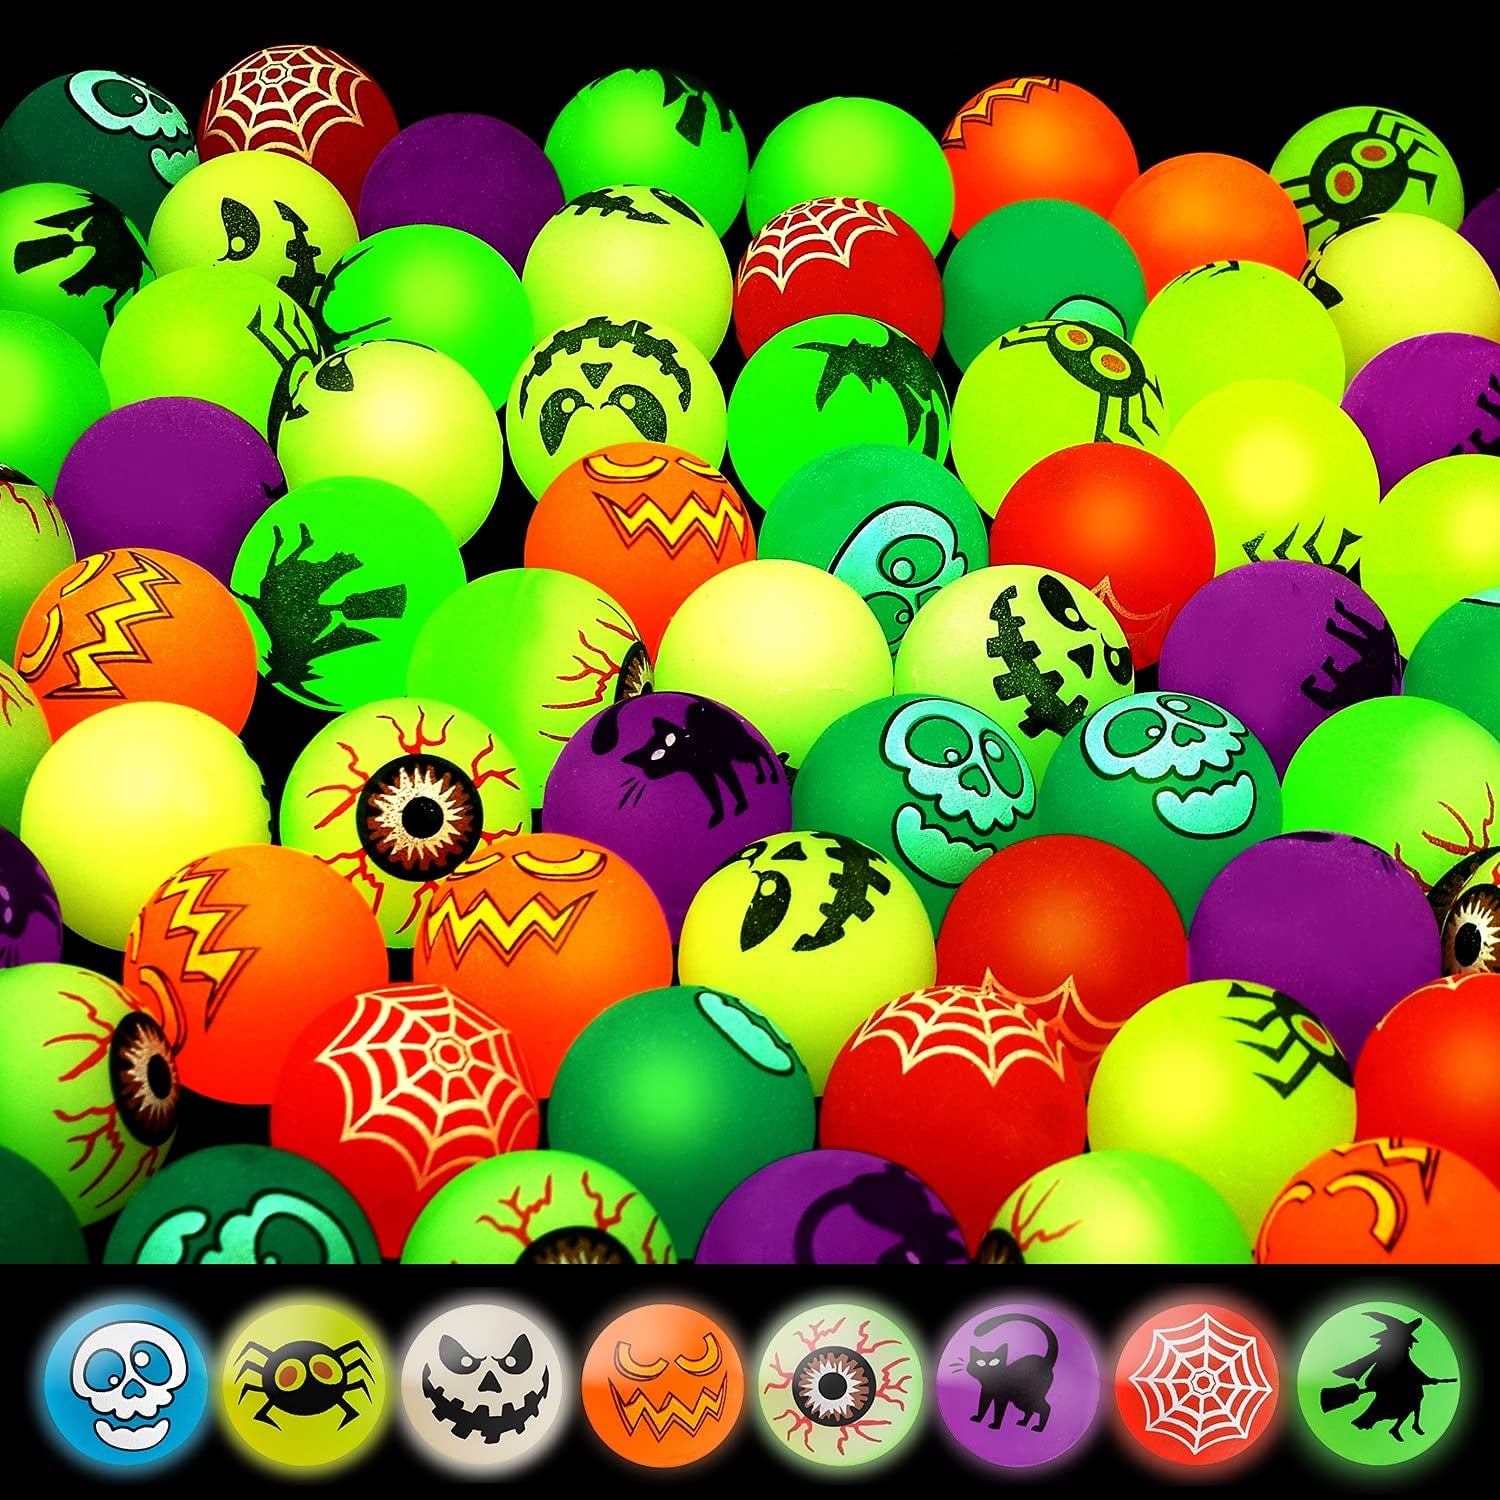 Spooktacular Fun with 40 Glow-in-the-Dark Bouncing Balls: Featuring 8 Halloween-Themed Designs! Perfect for Halloween Party Favors, Trick-or-Treating Goodie Bags, Classroom Game Rewards, and More. Comes with a Handy Pouch Bag